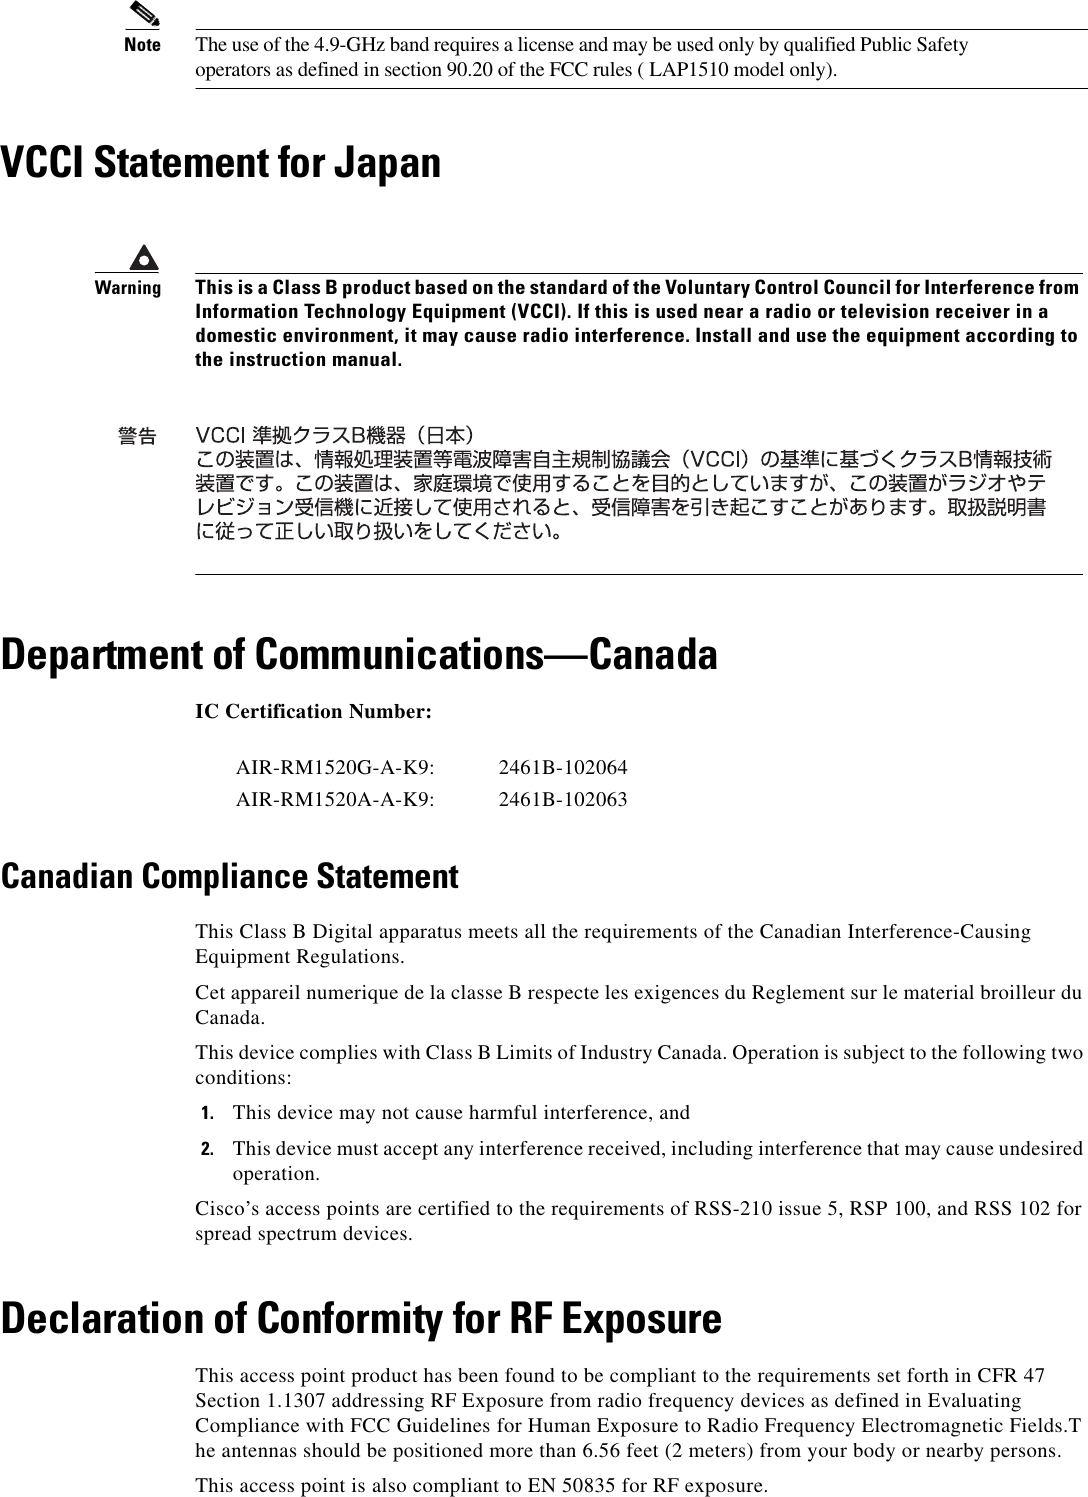 Note The use of the 4.9-GHz band requires a license and may be used only by qualified Public Safety operators as defined in section 90.20 of the FCC rules ( LAP1510 model only).VCCI Statement for JapanDepartment of Communications—CanadaIC Certification Number: Canadian Compliance StatementThis Class B Digital apparatus meets all the requirements of the Canadian Interference-Causing Equipment Regulations.Cet appareil numerique de la classe B respecte les exigences du Reglement sur le material broilleur du Canada.This device complies with Class B Limits of Industry Canada. Operation is subject to the following two conditions:1. This device may not cause harmful interference, and2. This device must accept any interference received, including interference that may cause undesired operation.Cisco’s access points are certified to the requirements of RSS-210 issue 5, RSP 100, and RSS 102 for spread spectrum devices.Declaration of Conformity for RF ExposureThis access point product has been found to be compliant to the requirements set forth in CFR 47Section 1.1307 addressing RF Exposure from radio frequency devices as defined in Evaluating Compliance with FCC Guidelines for Human Exposure to Radio Frequency Electromagnetic Fields.T he antennas should be positioned more than 6.56 feet (2 meters) from your body or nearby persons.This access point is also compliant to EN 50835 for RF exposure.WarningThis is a Class B product based on the standard of the Voluntary Control Council for Interference from Information Technology Equipment (VCCI). If this is used near a radio or television receiver in a domestic environment, it may cause radio interference. Install and use the equipment according to the instruction manual.AIR-RM1520G-A-K9: 2461B-102064AIR-RM1520A-A-K9: 2461B-102063